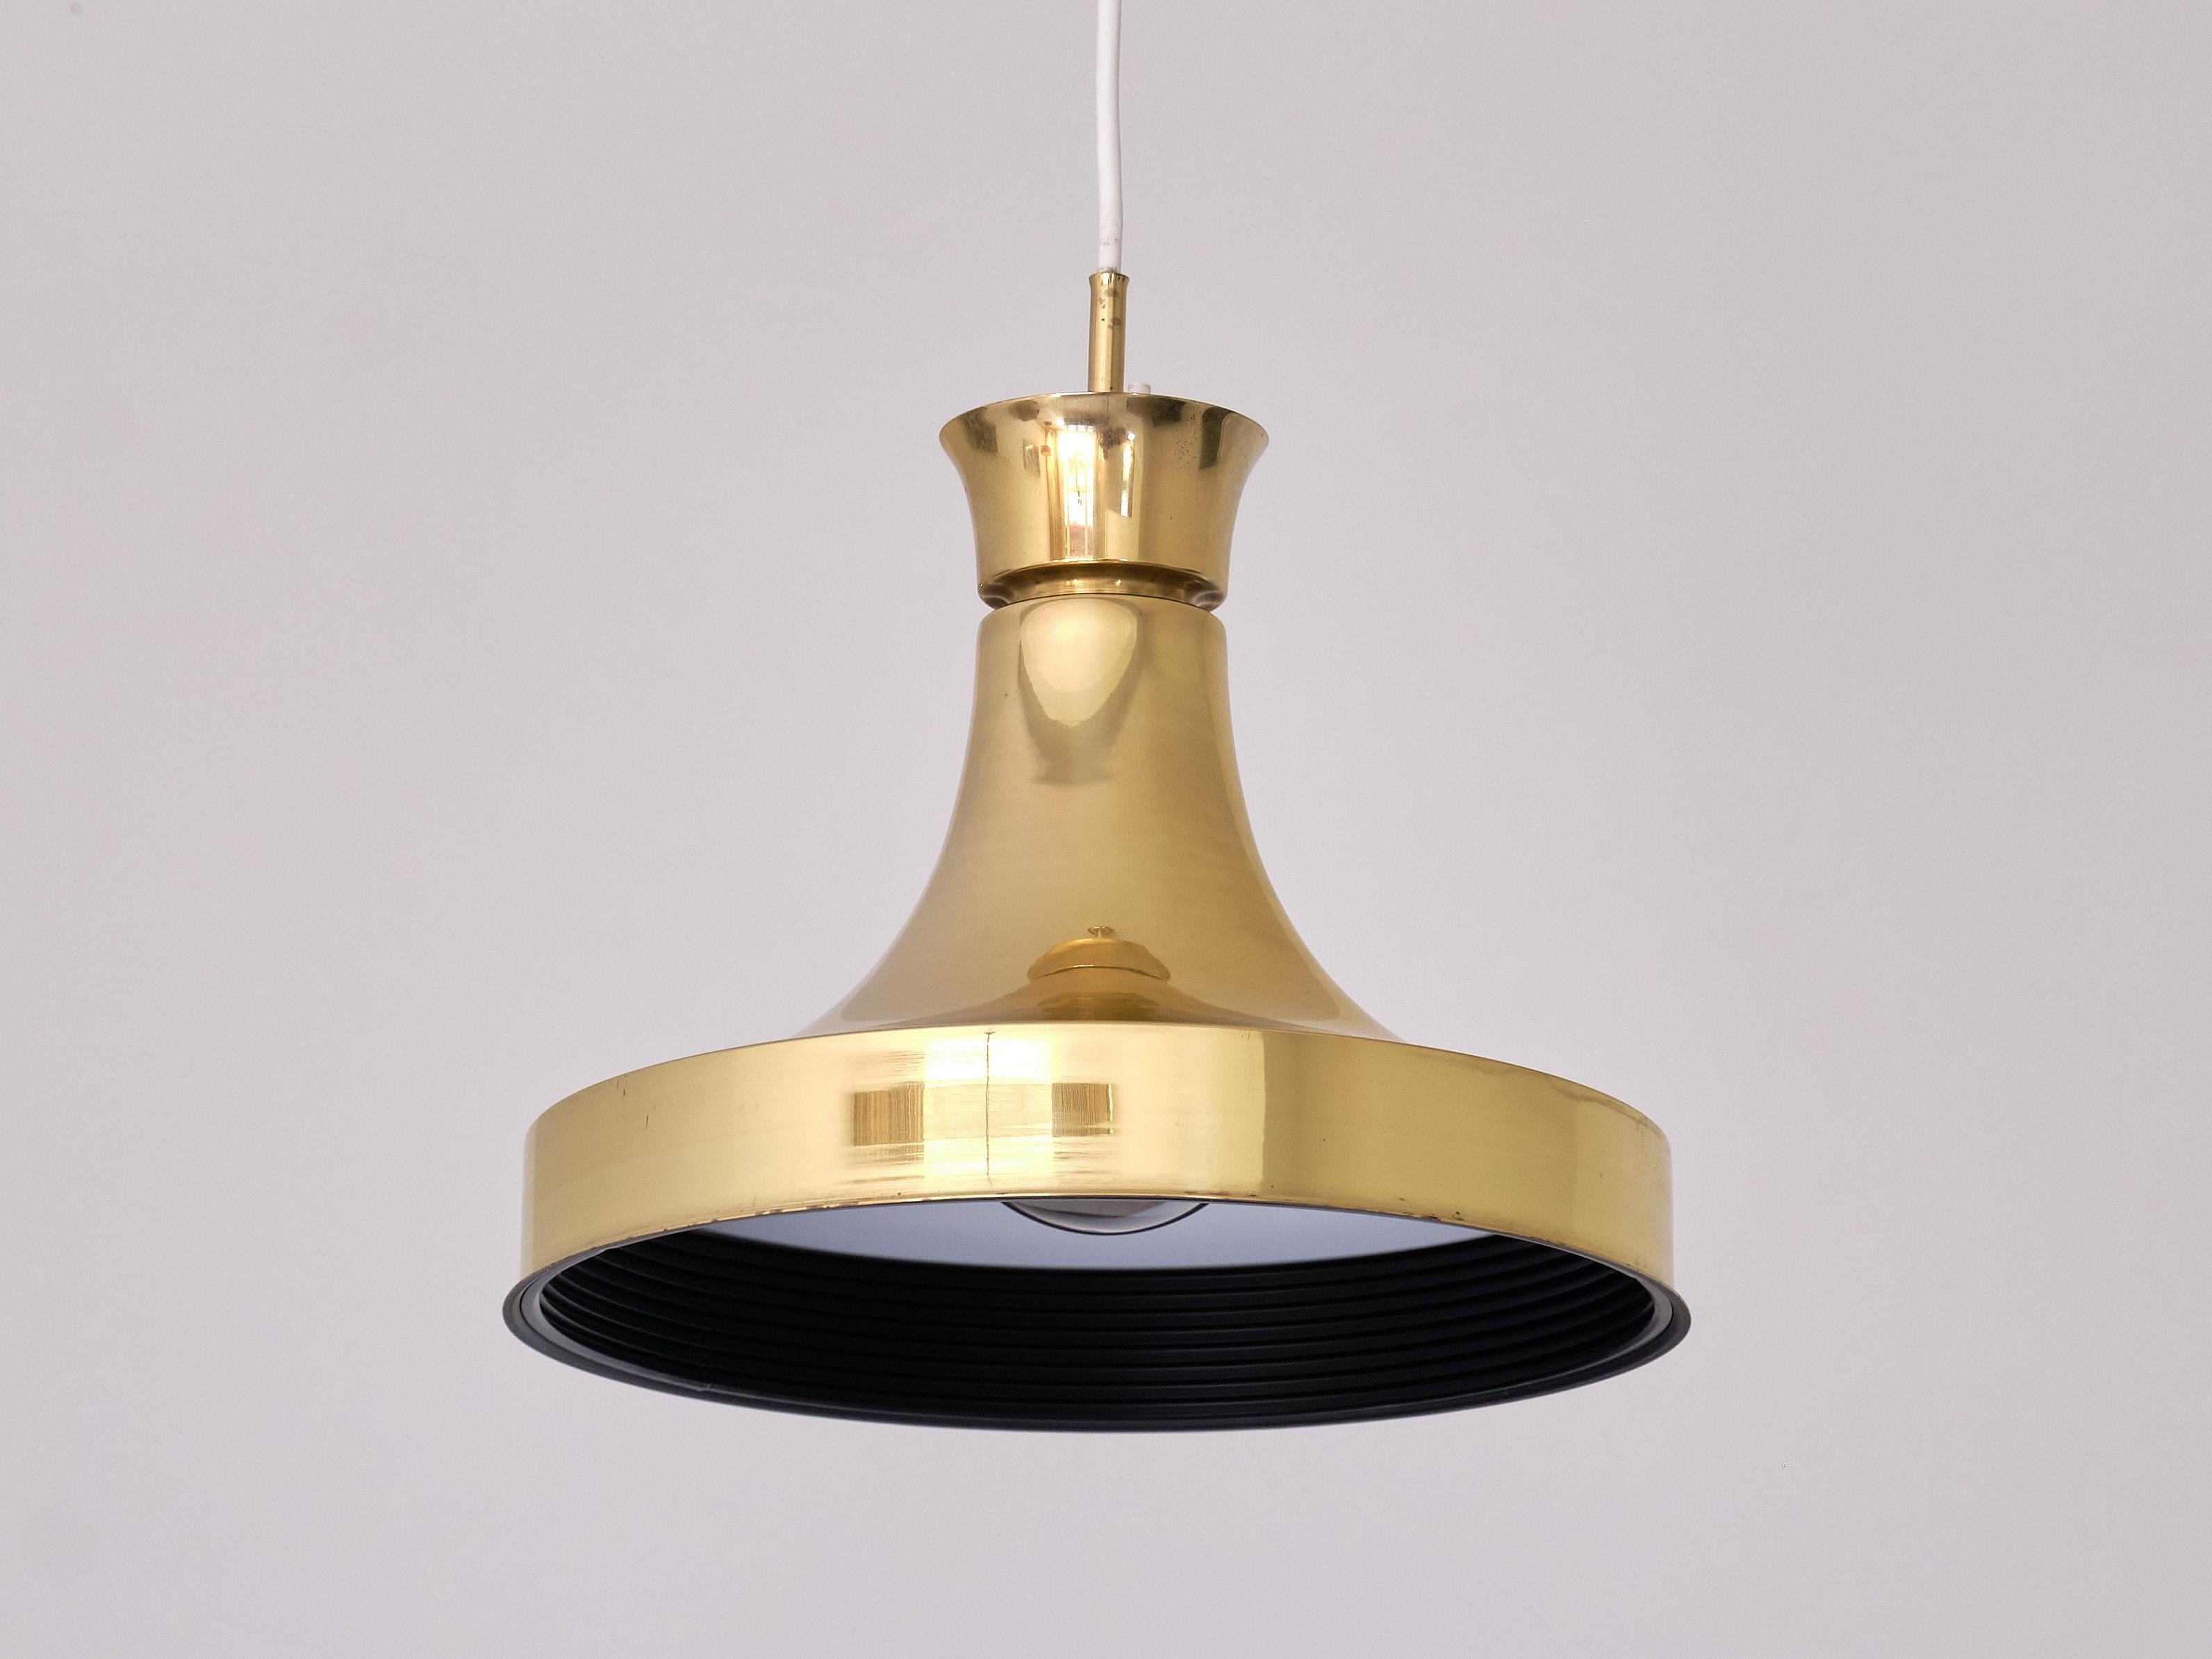 Mid-20th Century Swedish Modern Brass Pendant Light by Fagerhults Belysning, Sweden, 1960s For Sale